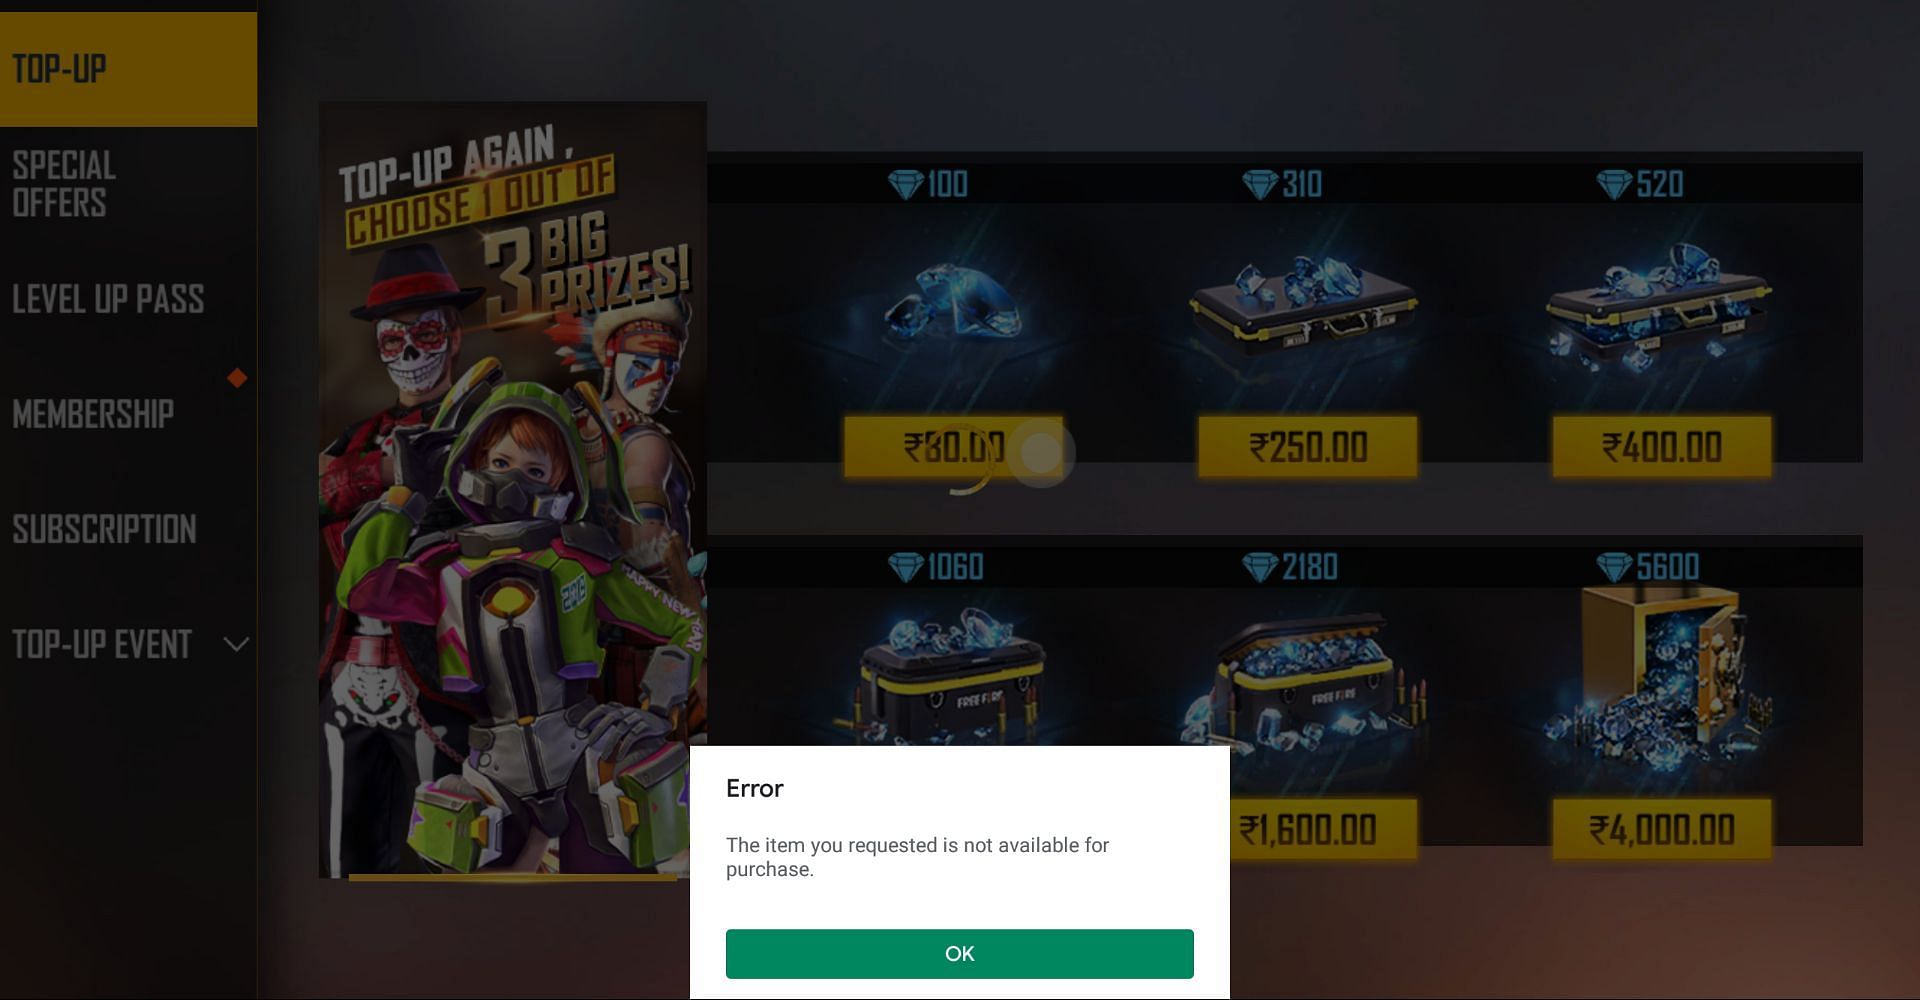 Error while attempting to make in-app purchases (Image via Garena)